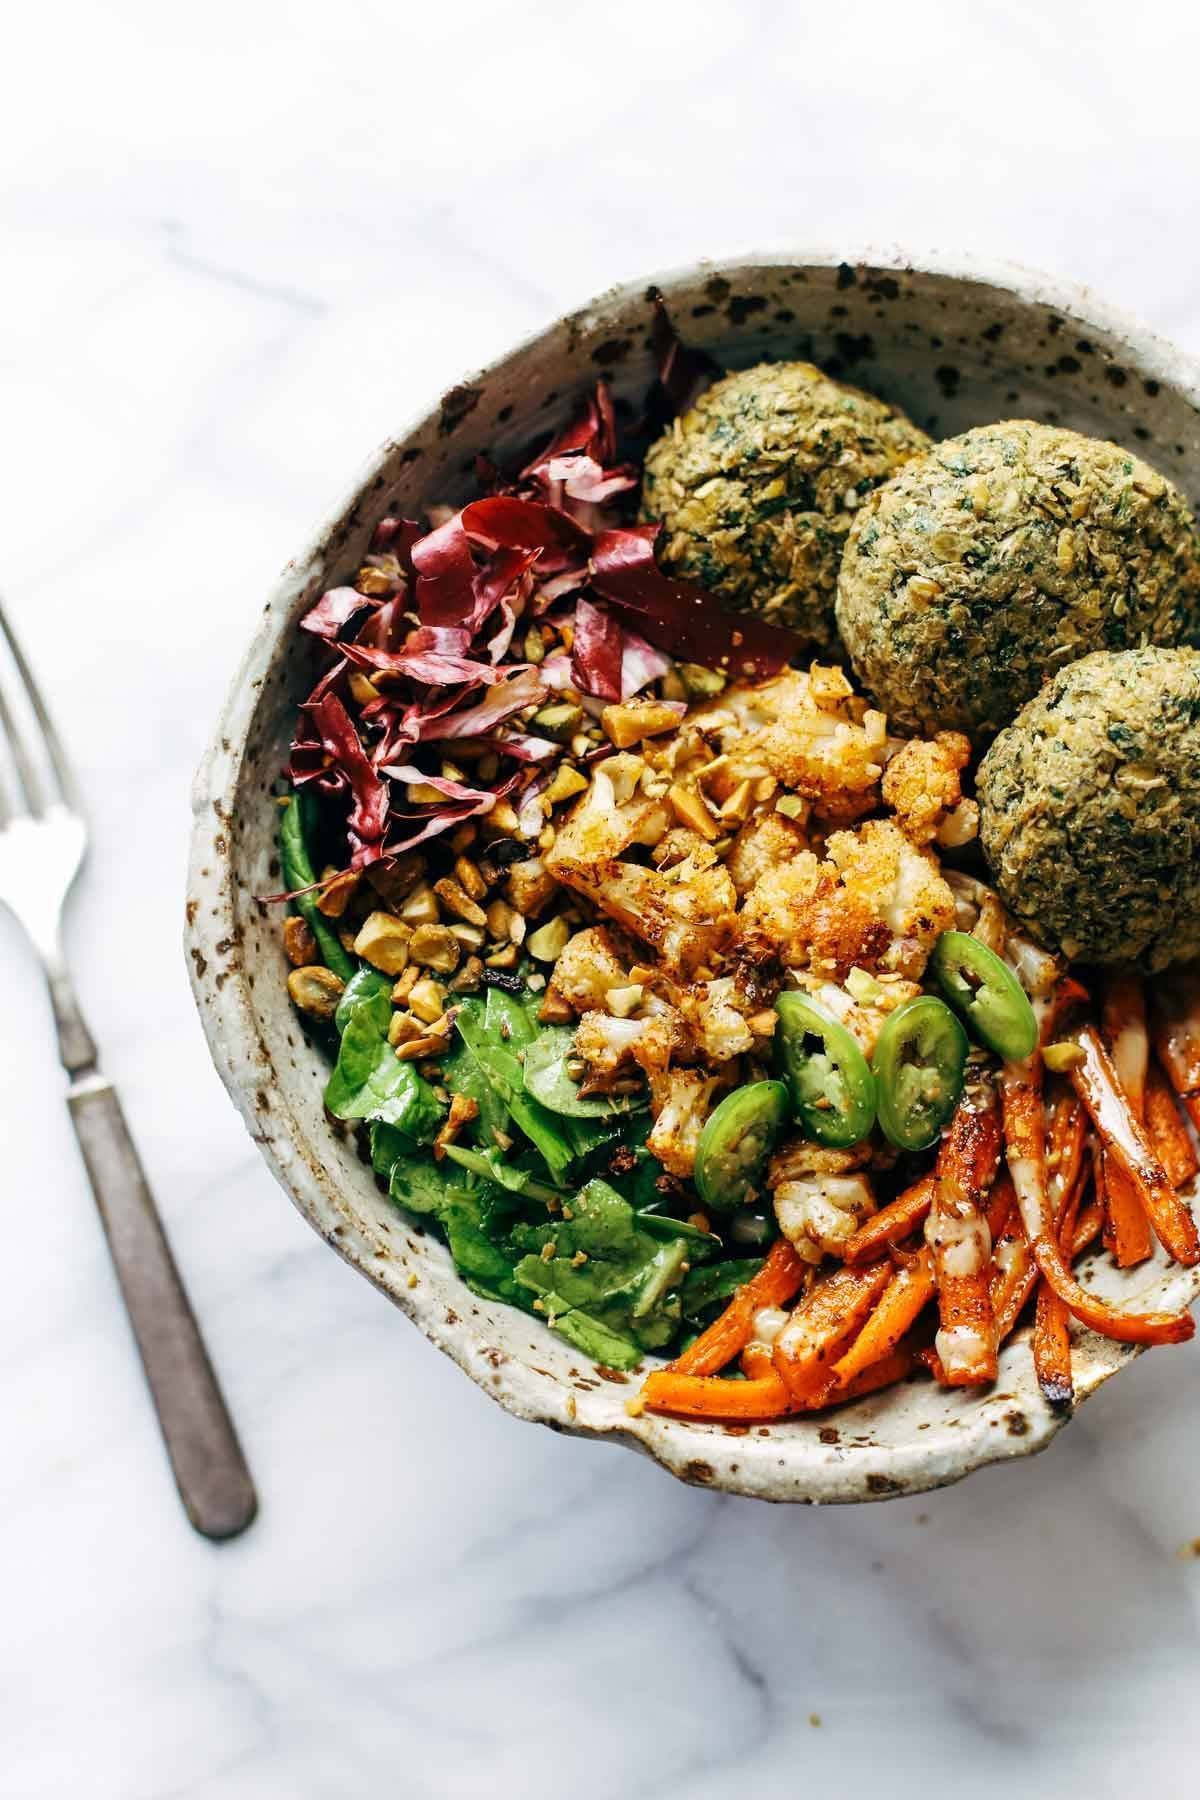 Eat well AND keep your glow all through winter! Easy homemade falafel, roasted veggies, and flavorful sauce all in one big bowl! vegetarian / vegan / gluten free recipe. | pinchofyum.com